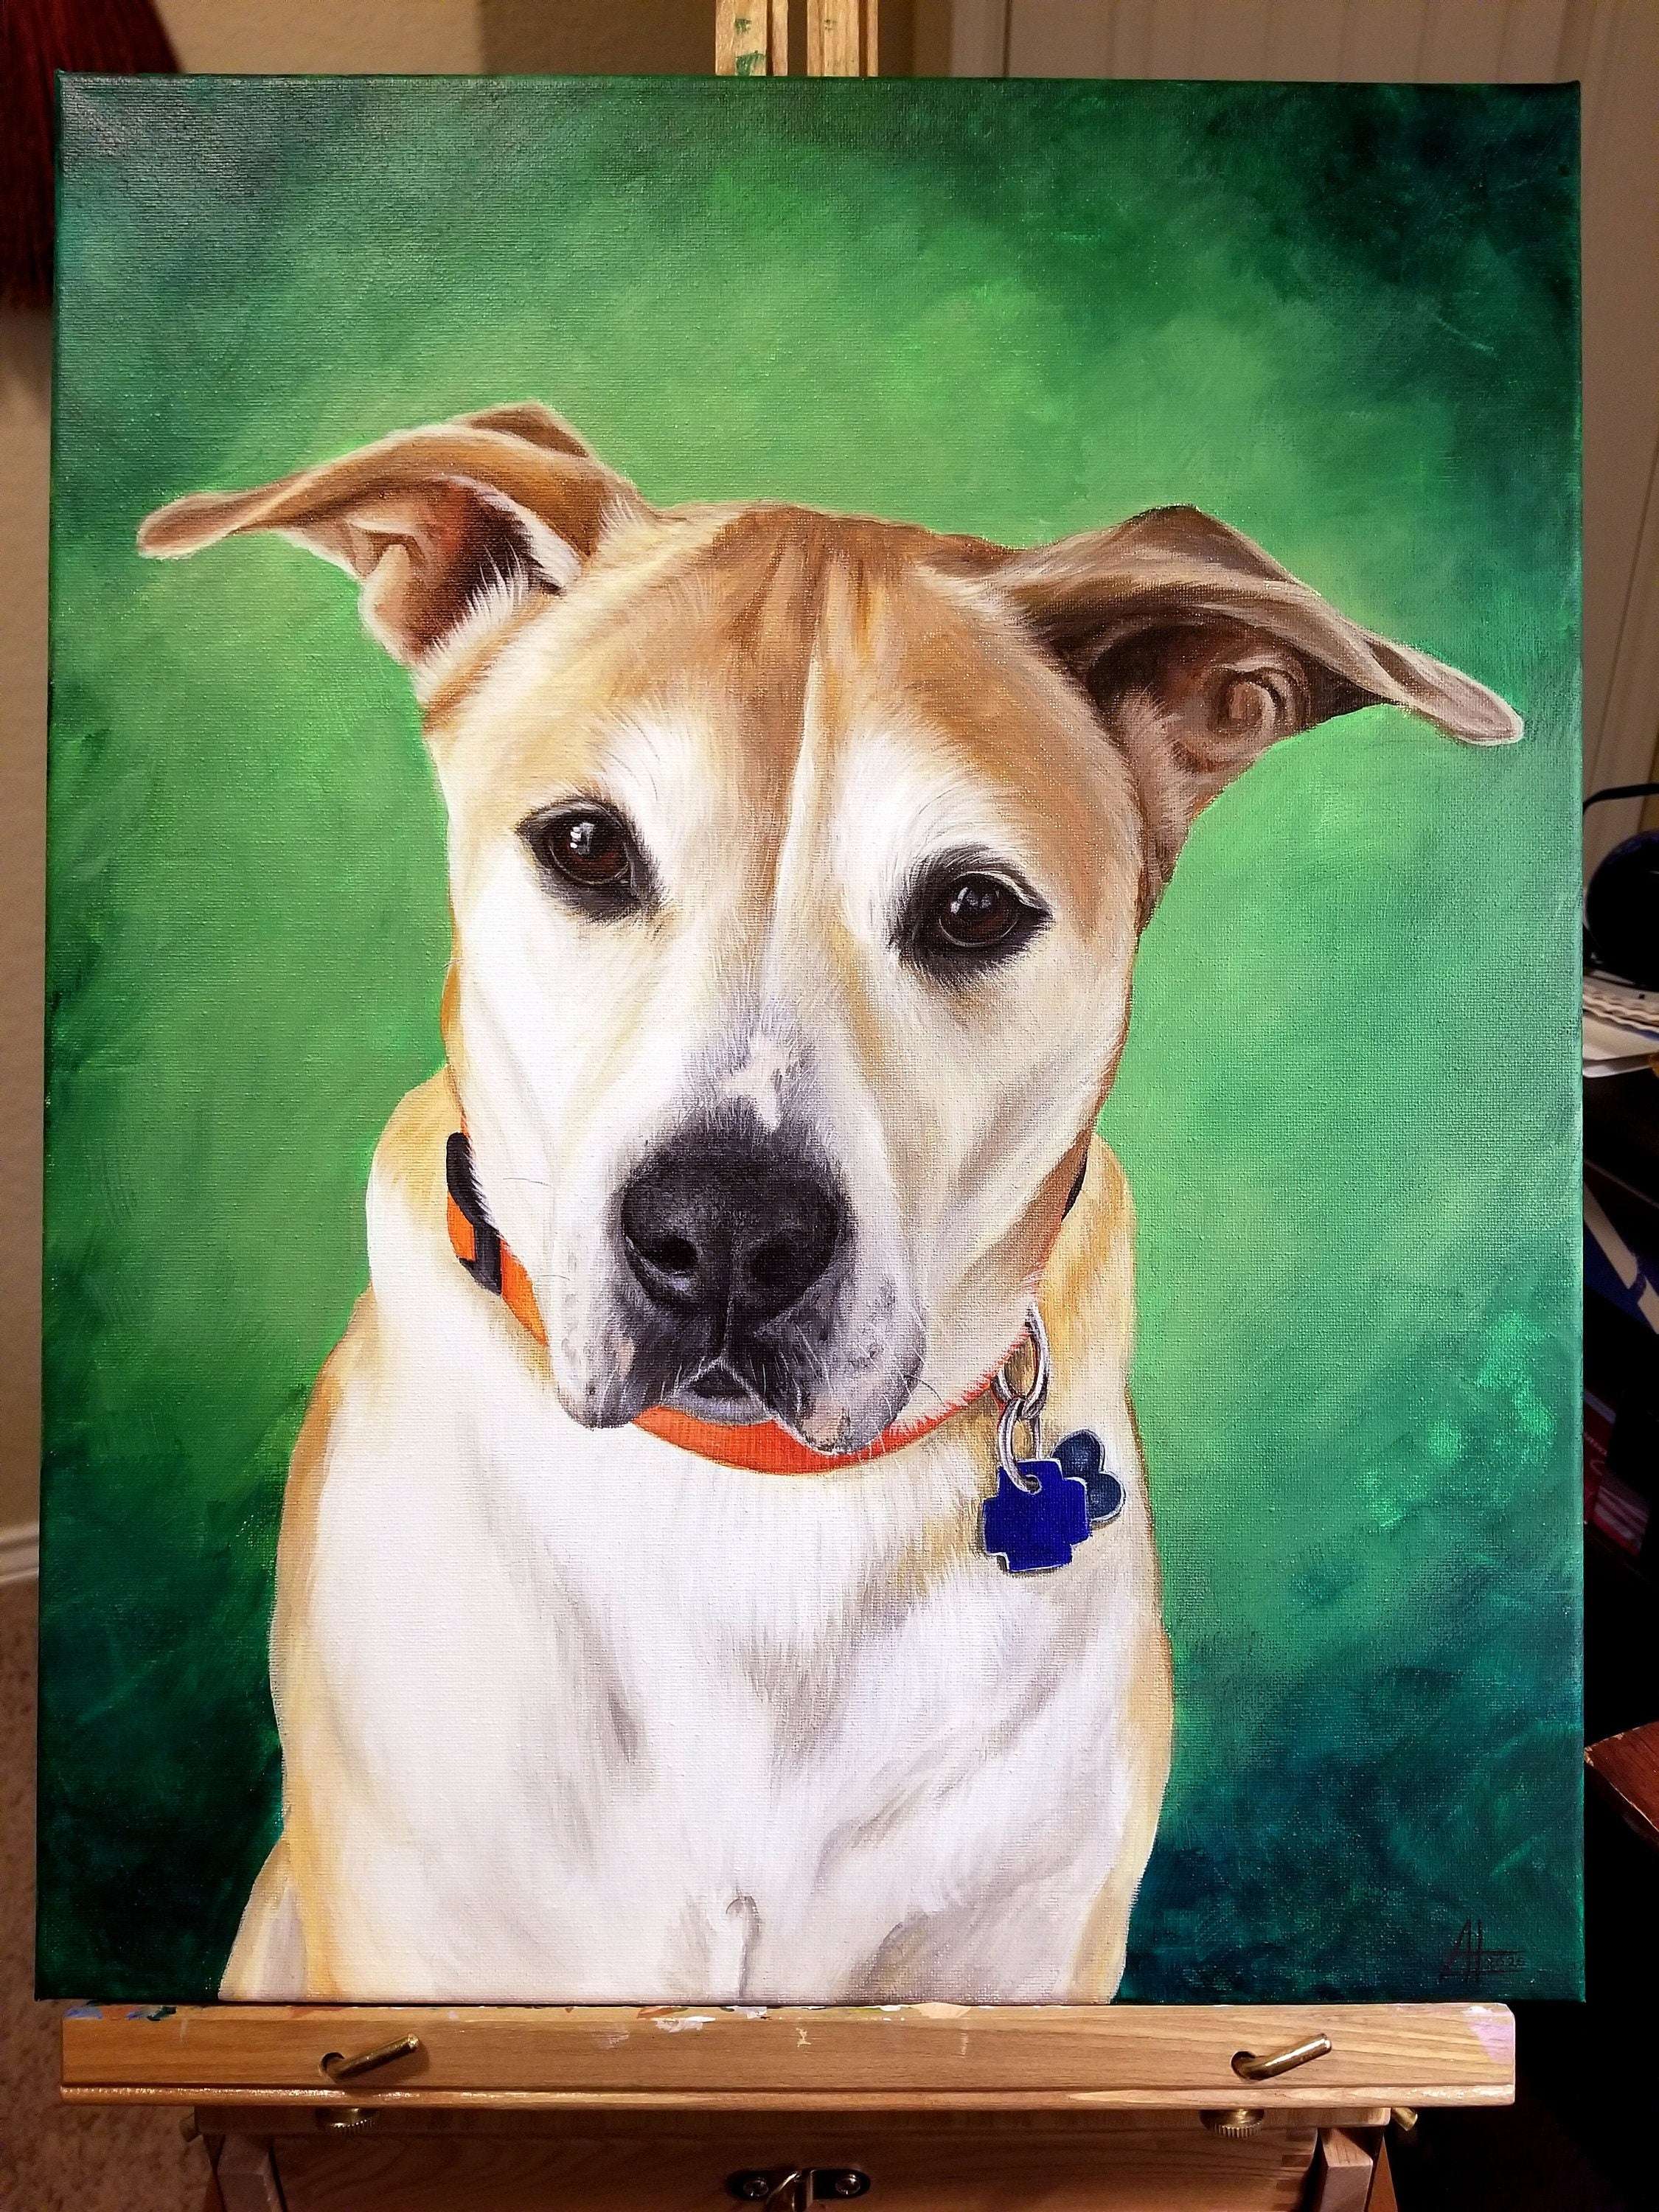 Pet portrait of a brown and white dog with an orange collar, against a green backdrop, on a wooden easel.